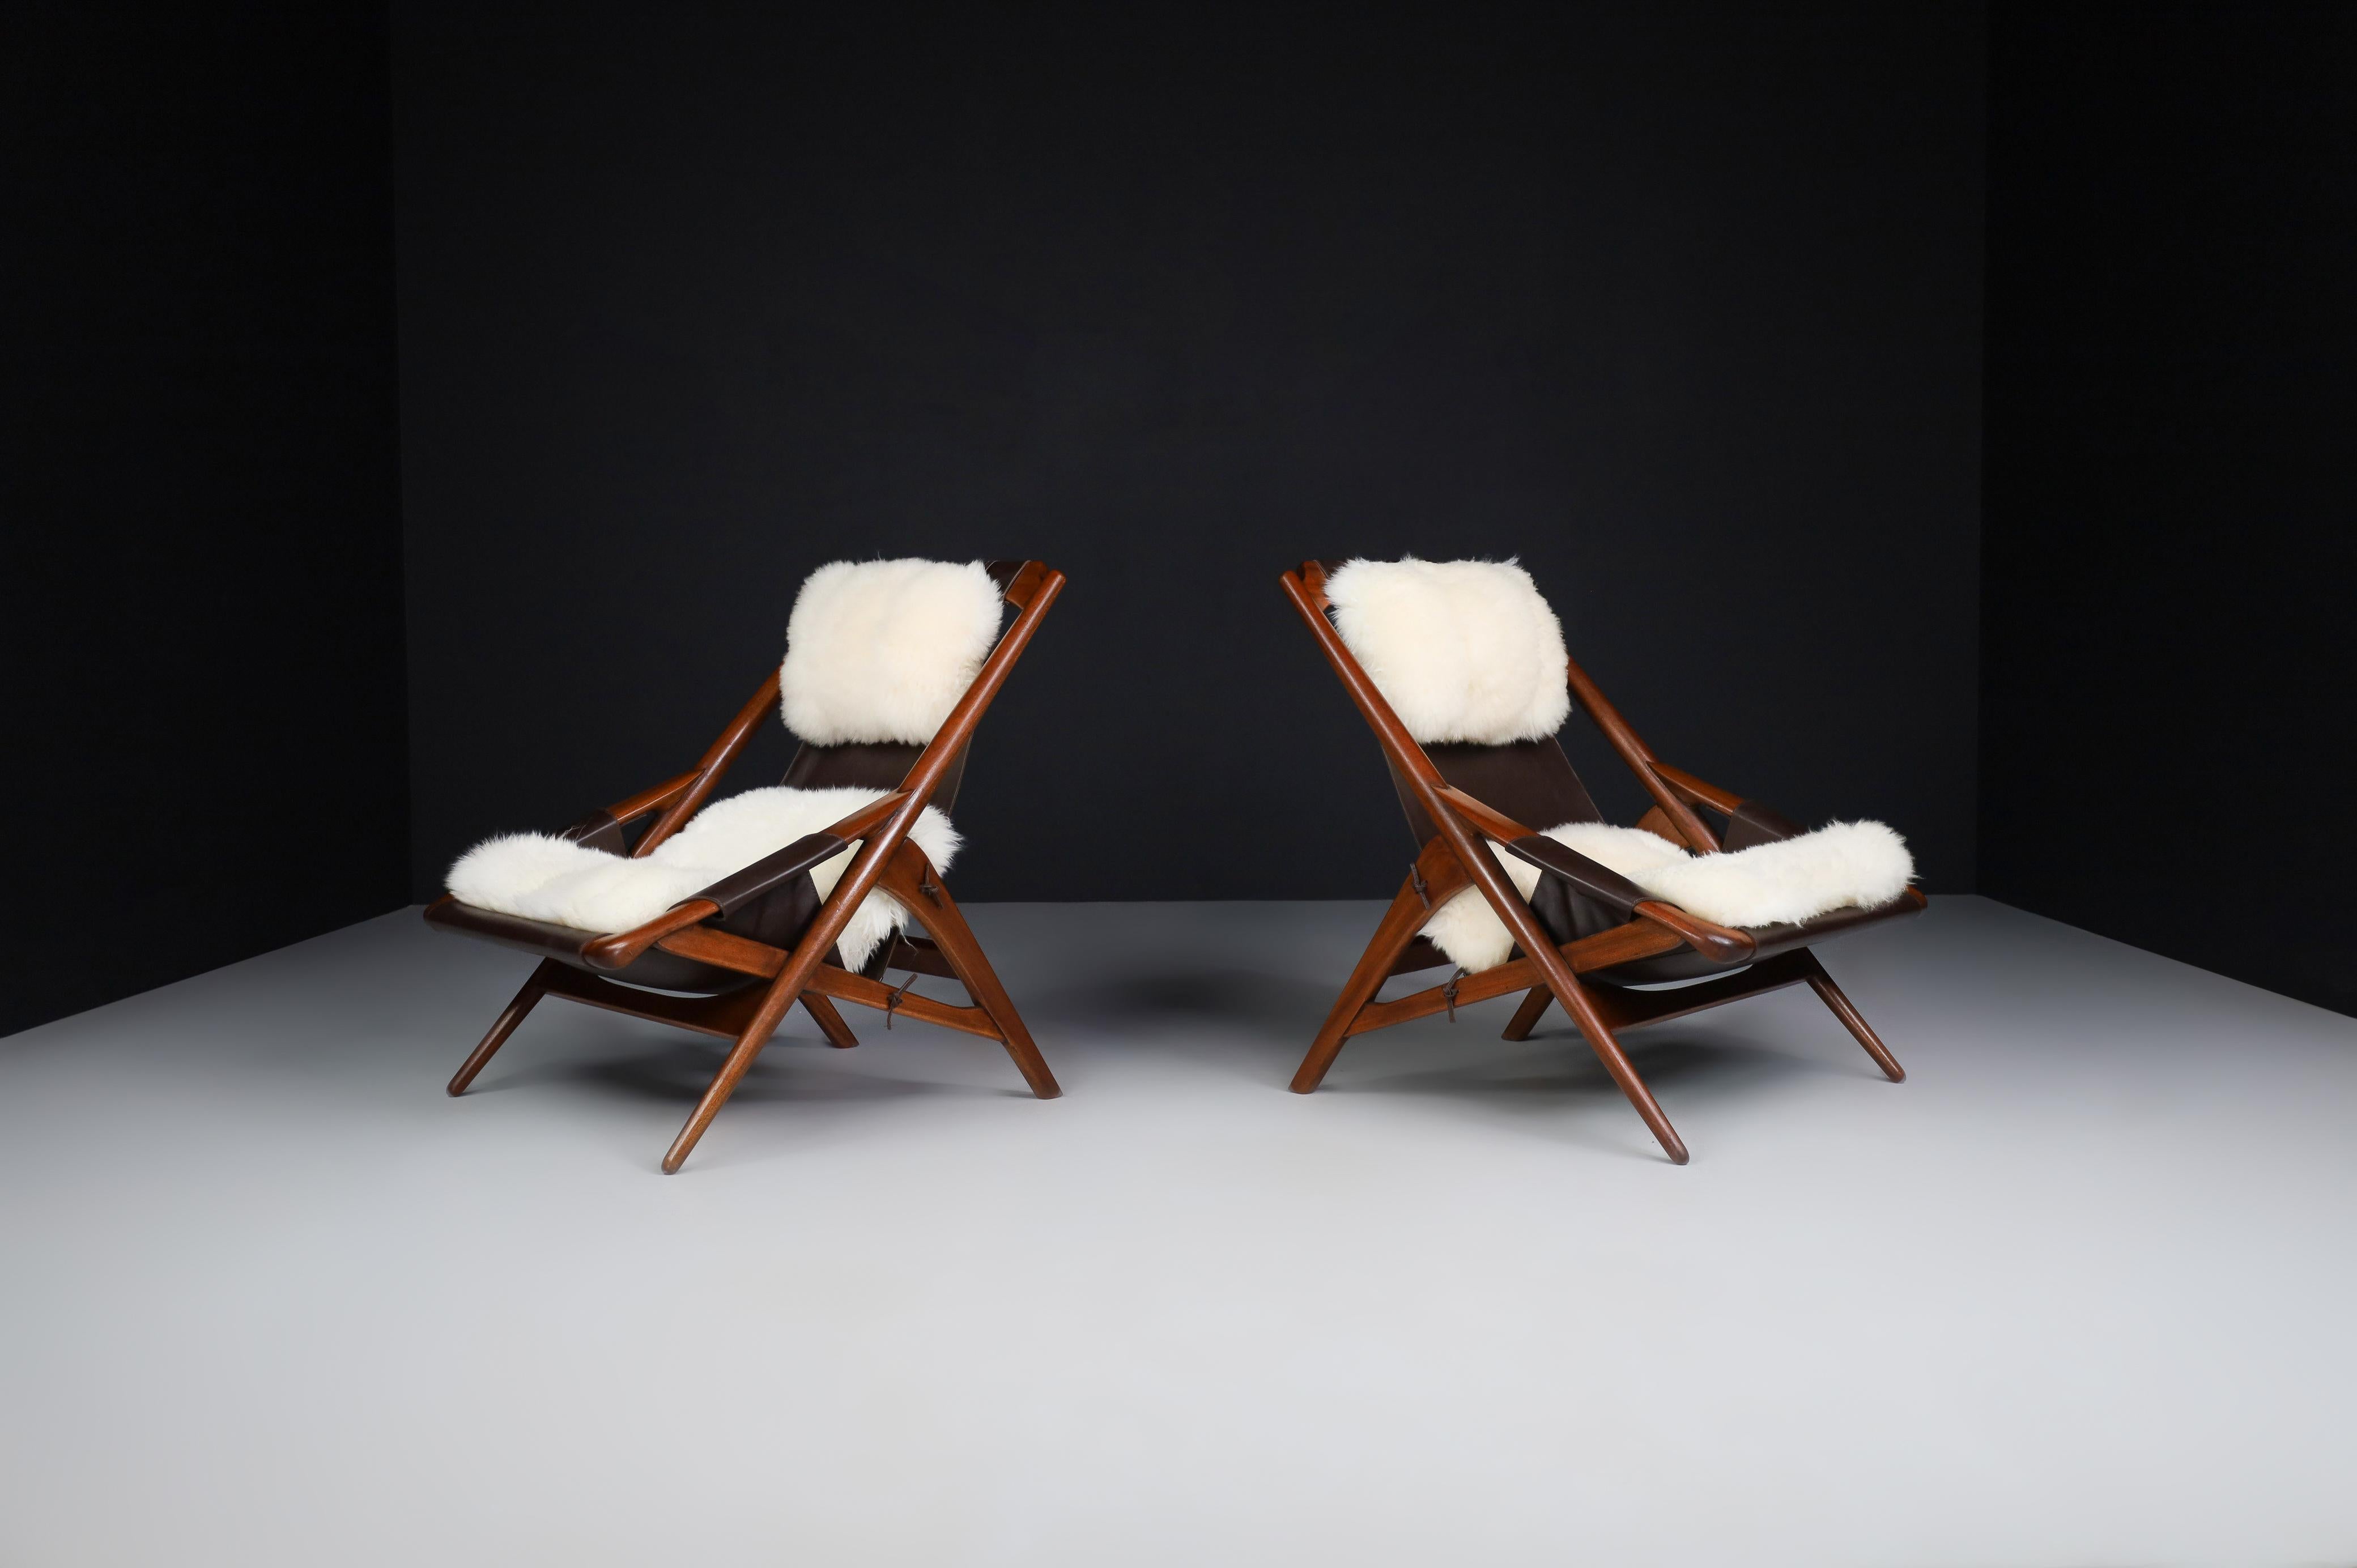 W.D. Andersag lounge chairs teak and leather, Italy 1959

Outstanding, fully restored pair of so-called 'hunting' lounge chairs created by W.D. Andersag and manufactured by Ideal Piacenza, Italy, 1959. This dynamic-shaped pair of lounge chairs